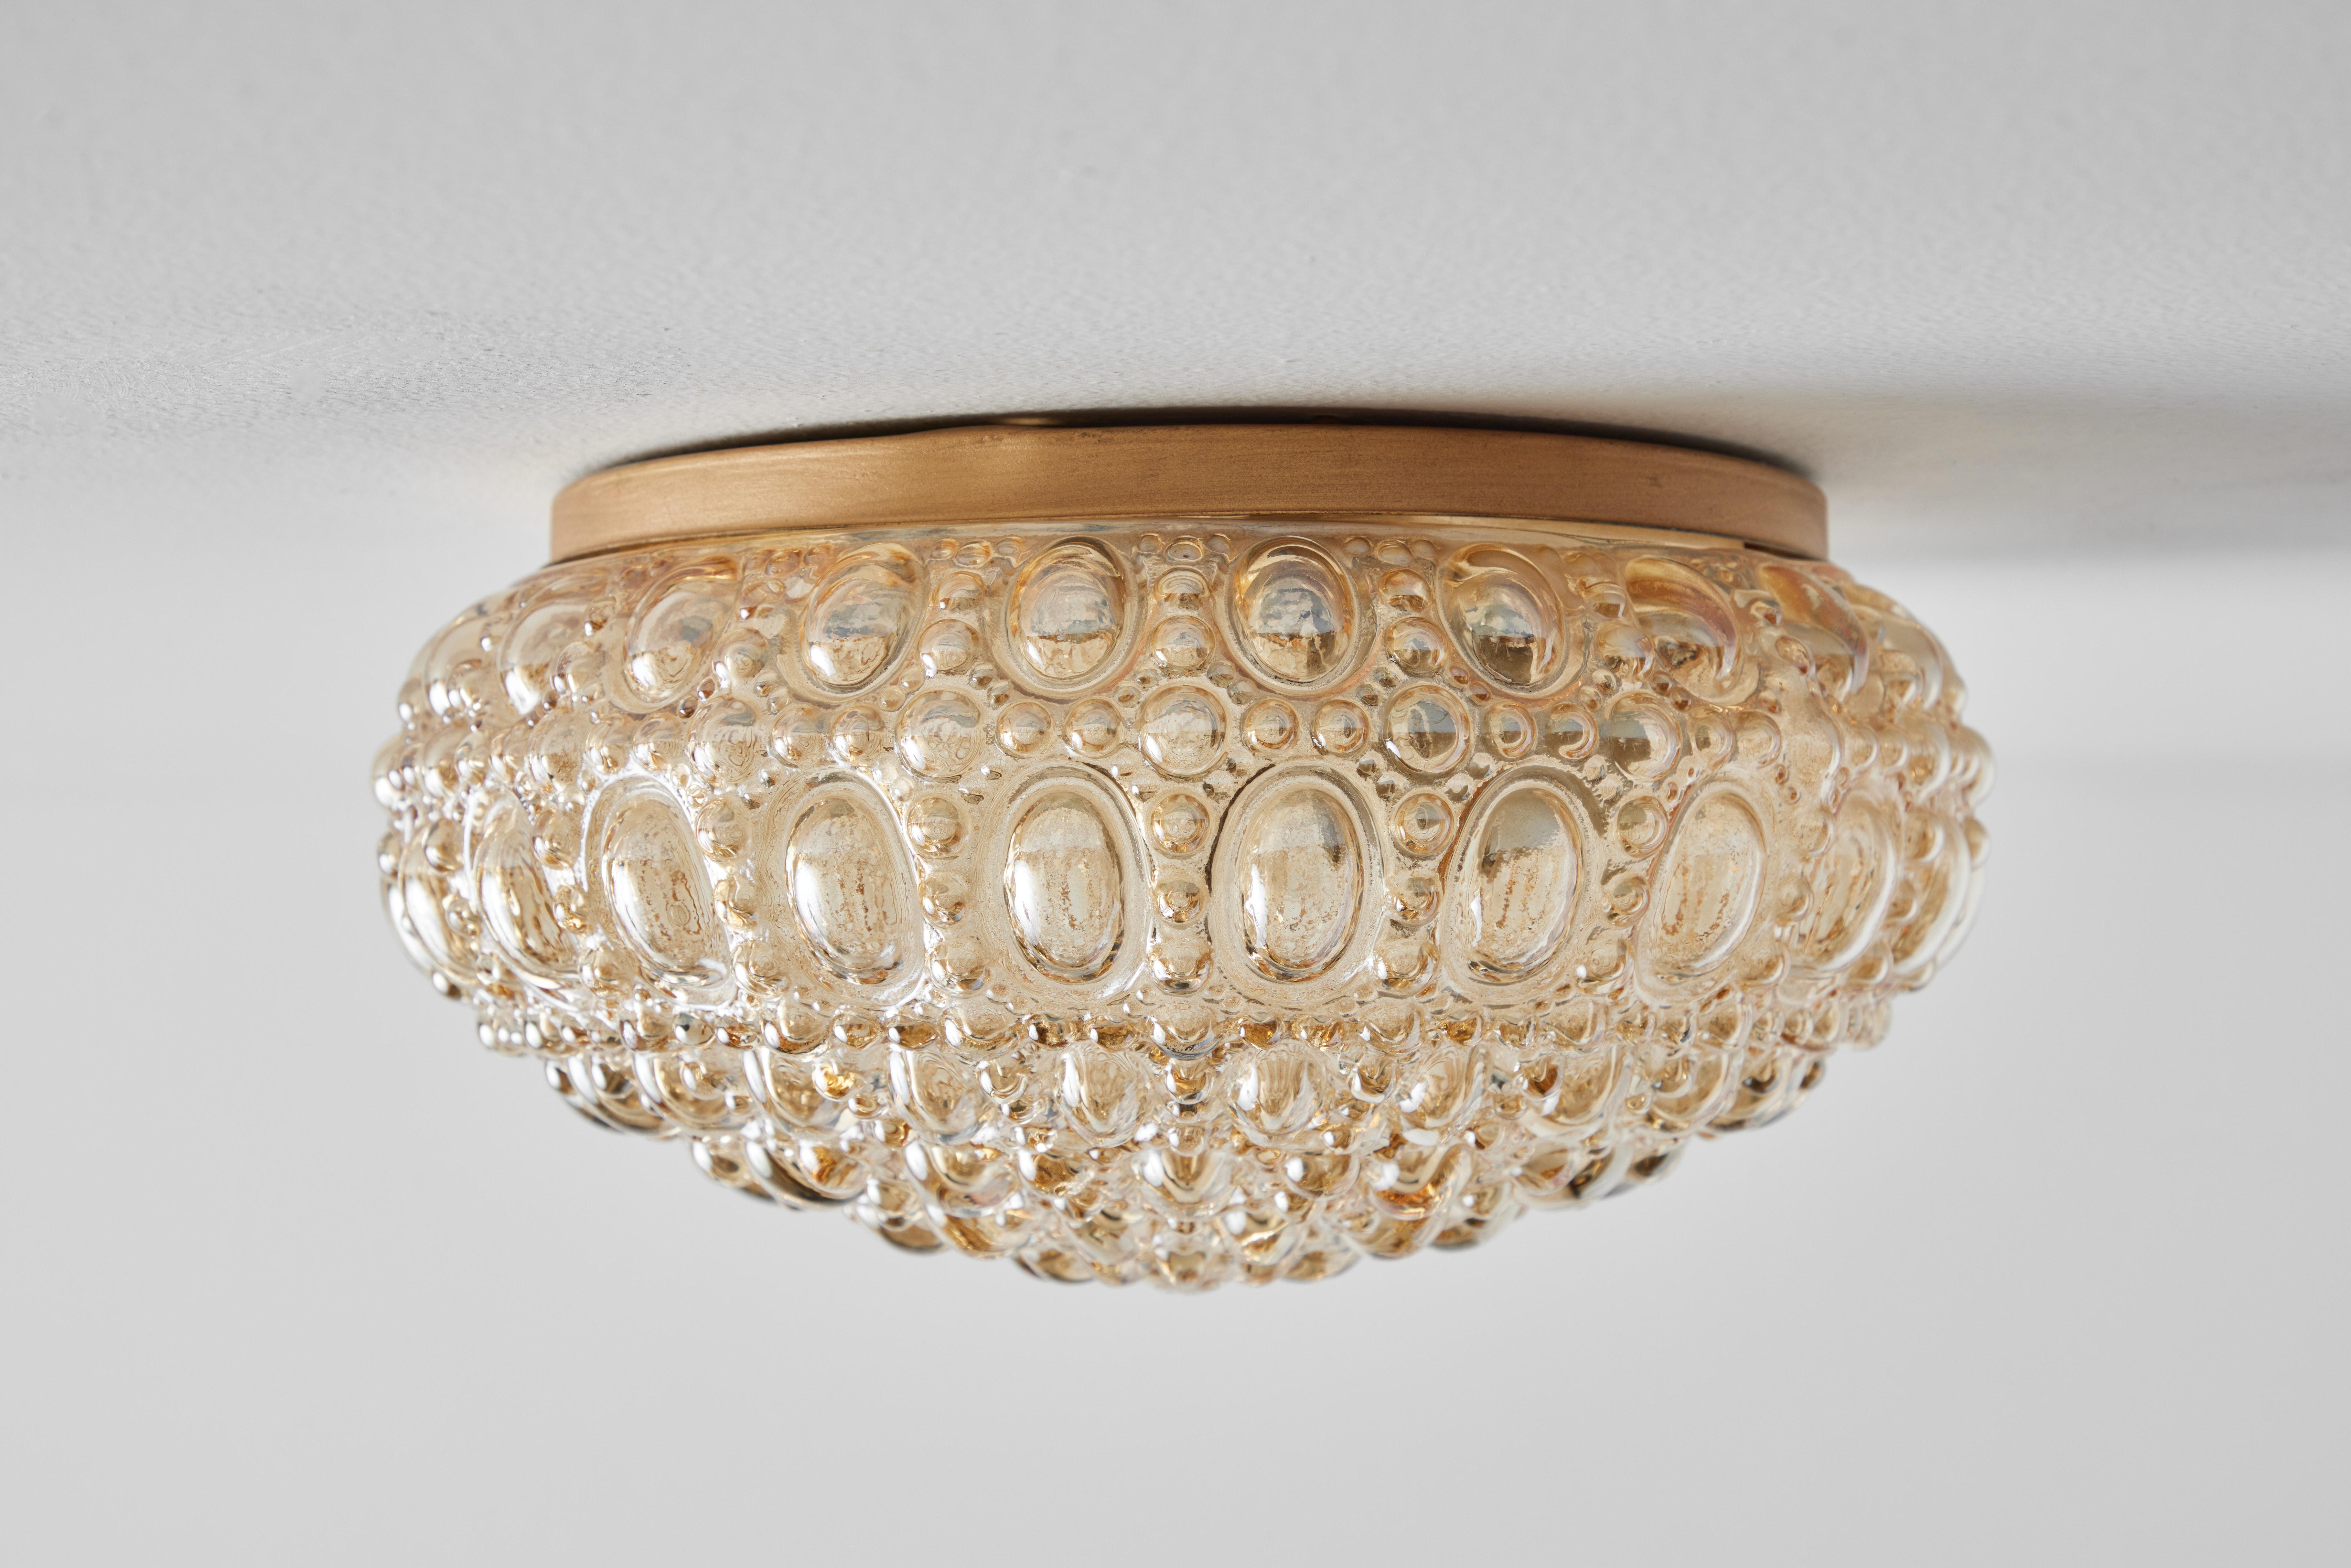 1960s Helena Tynell Model #A665 Amber Bubble Glass Flush Mount for Limburg. Executed in thick and heavy textured amber bubble glass and metal brass mount. Can be mounted on the ceiling or used as a wall lamp. Fabricated in Limburg, Germany circa